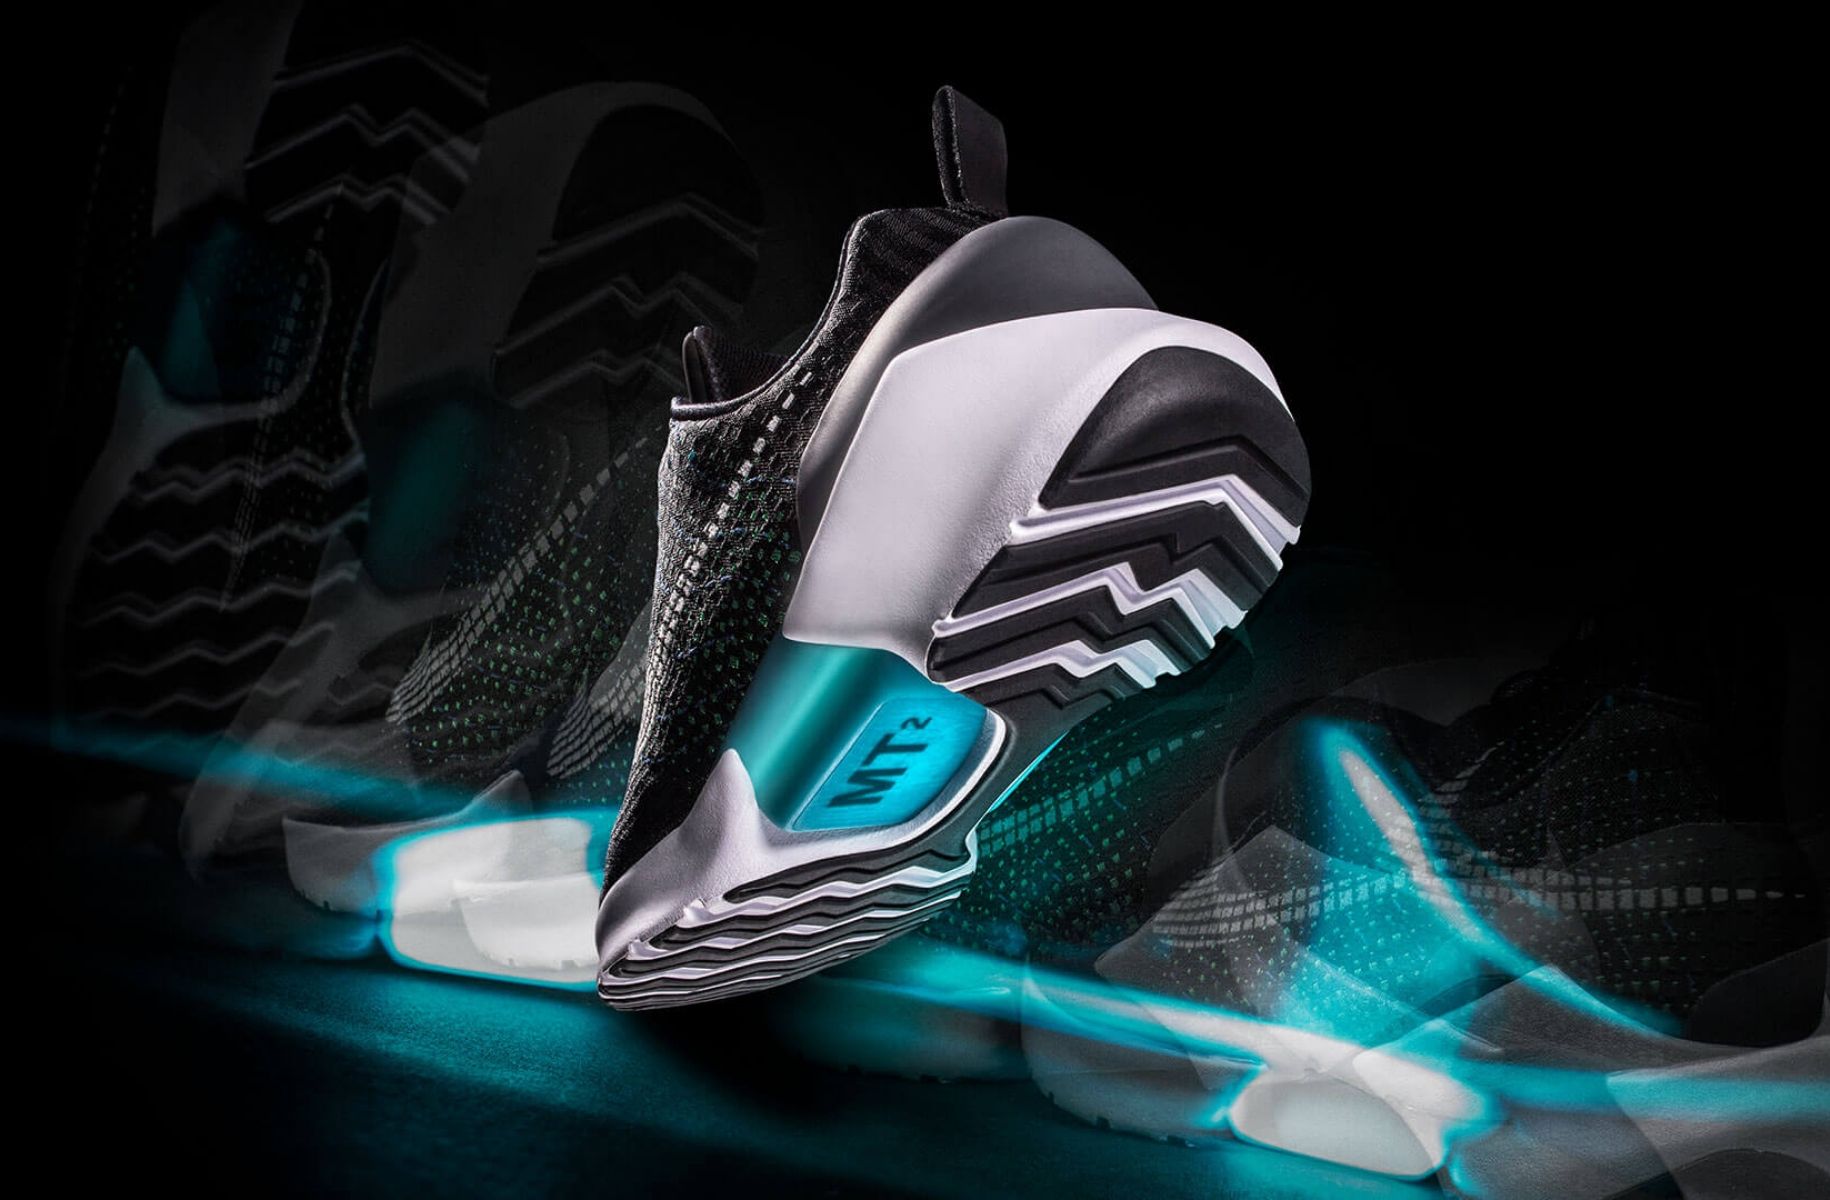 render of Nike Hyper Adapt in motion showing tread from rearview